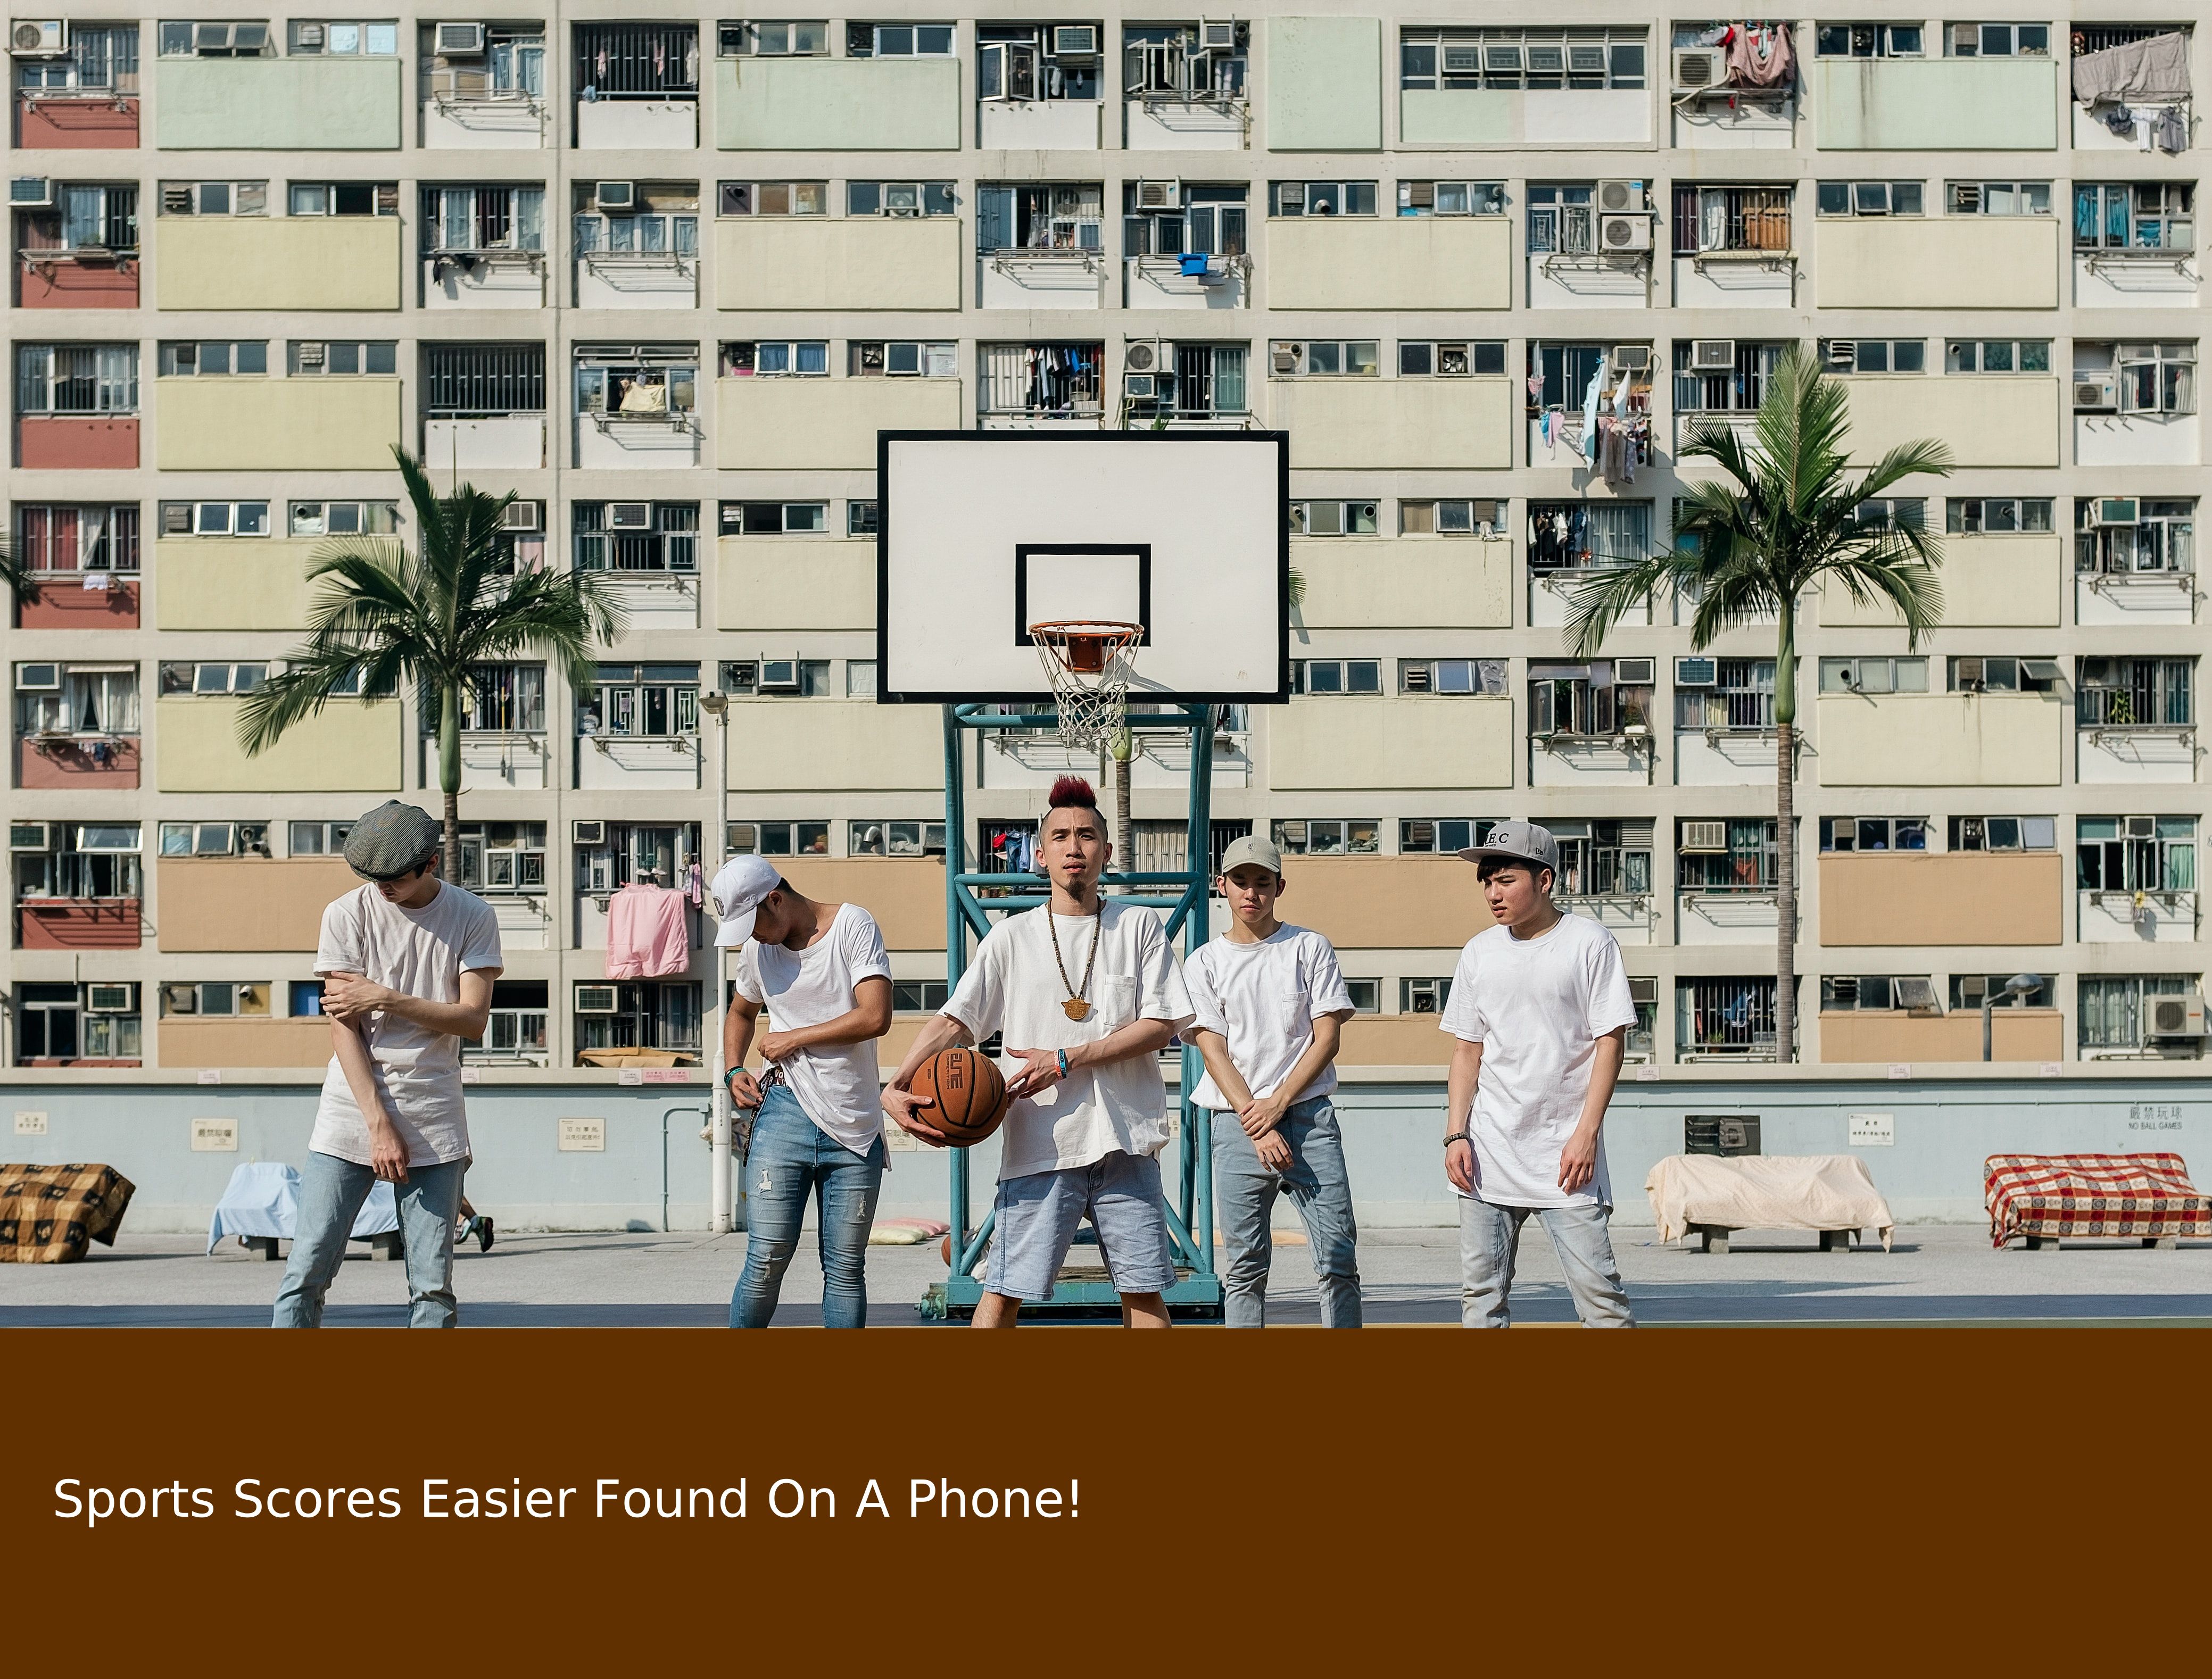 Basketball players in Hong Kong with a large box obstructing the lower 10% of the picture.